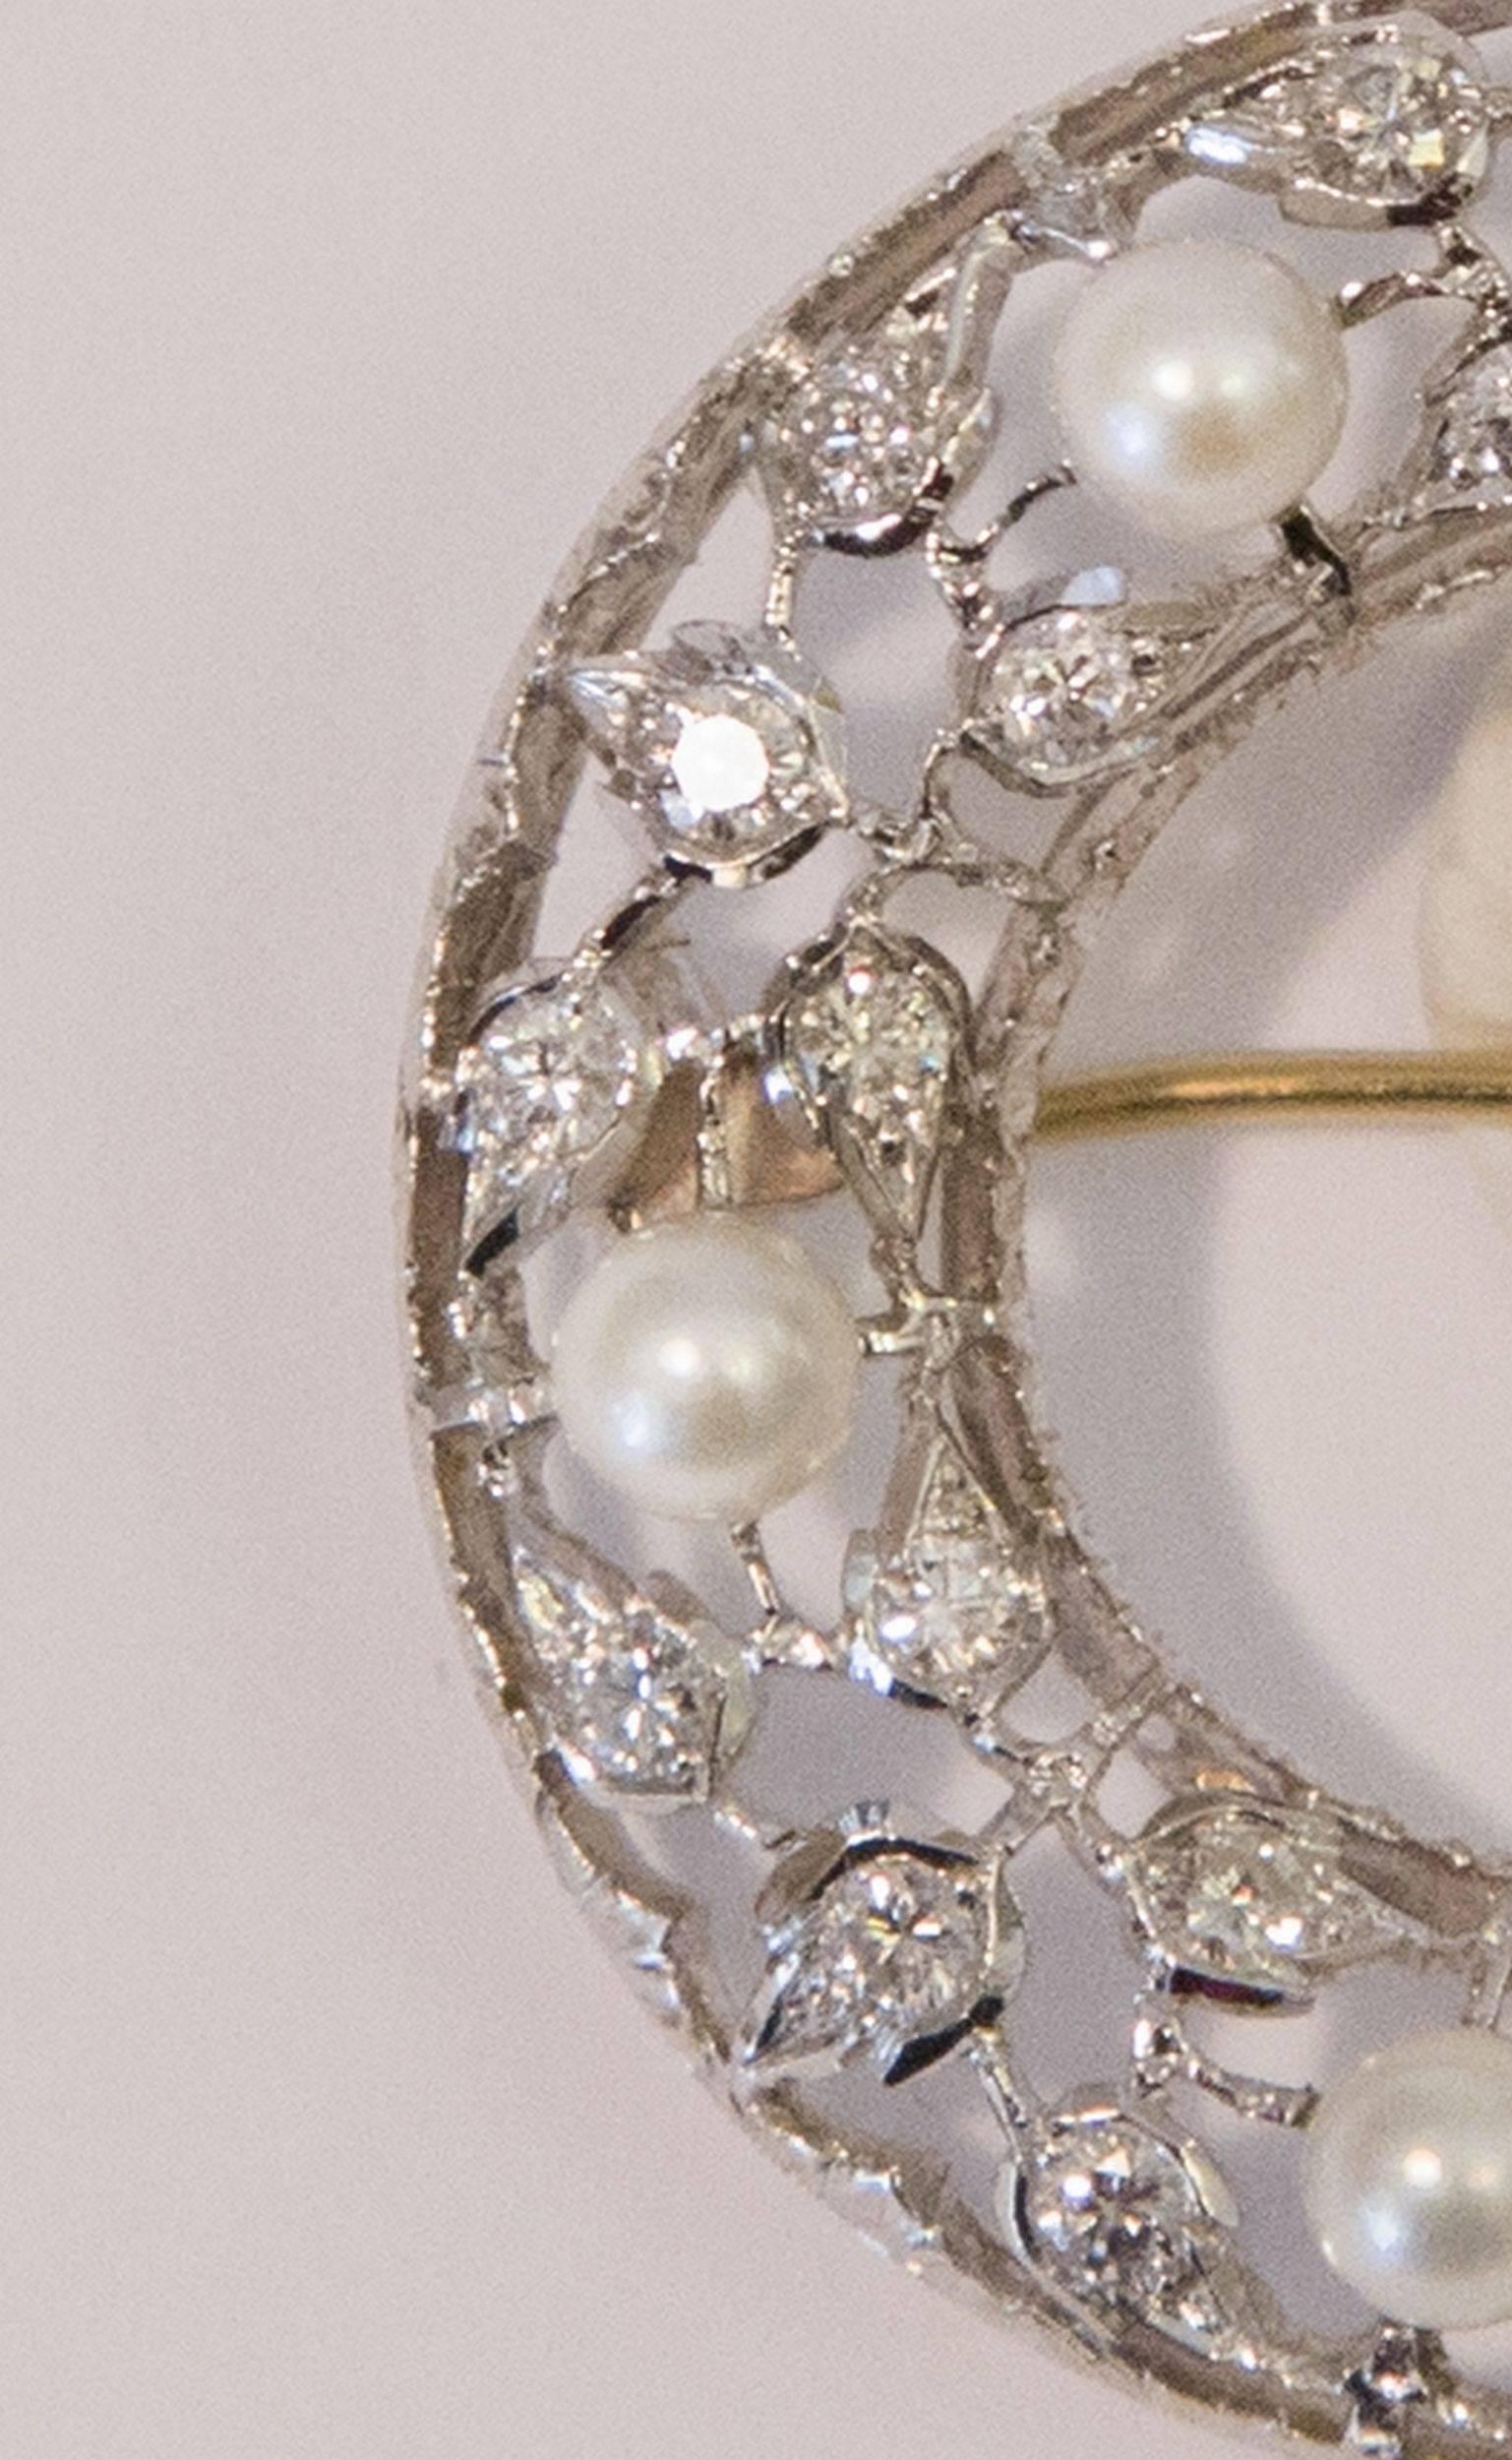 Exquisite Mario Buccellati oval brooch. White molded and perforated gold, 30 diamonds total carat. 0.87 and six small pearls. Item offered with “Certificate of Authenticity”.